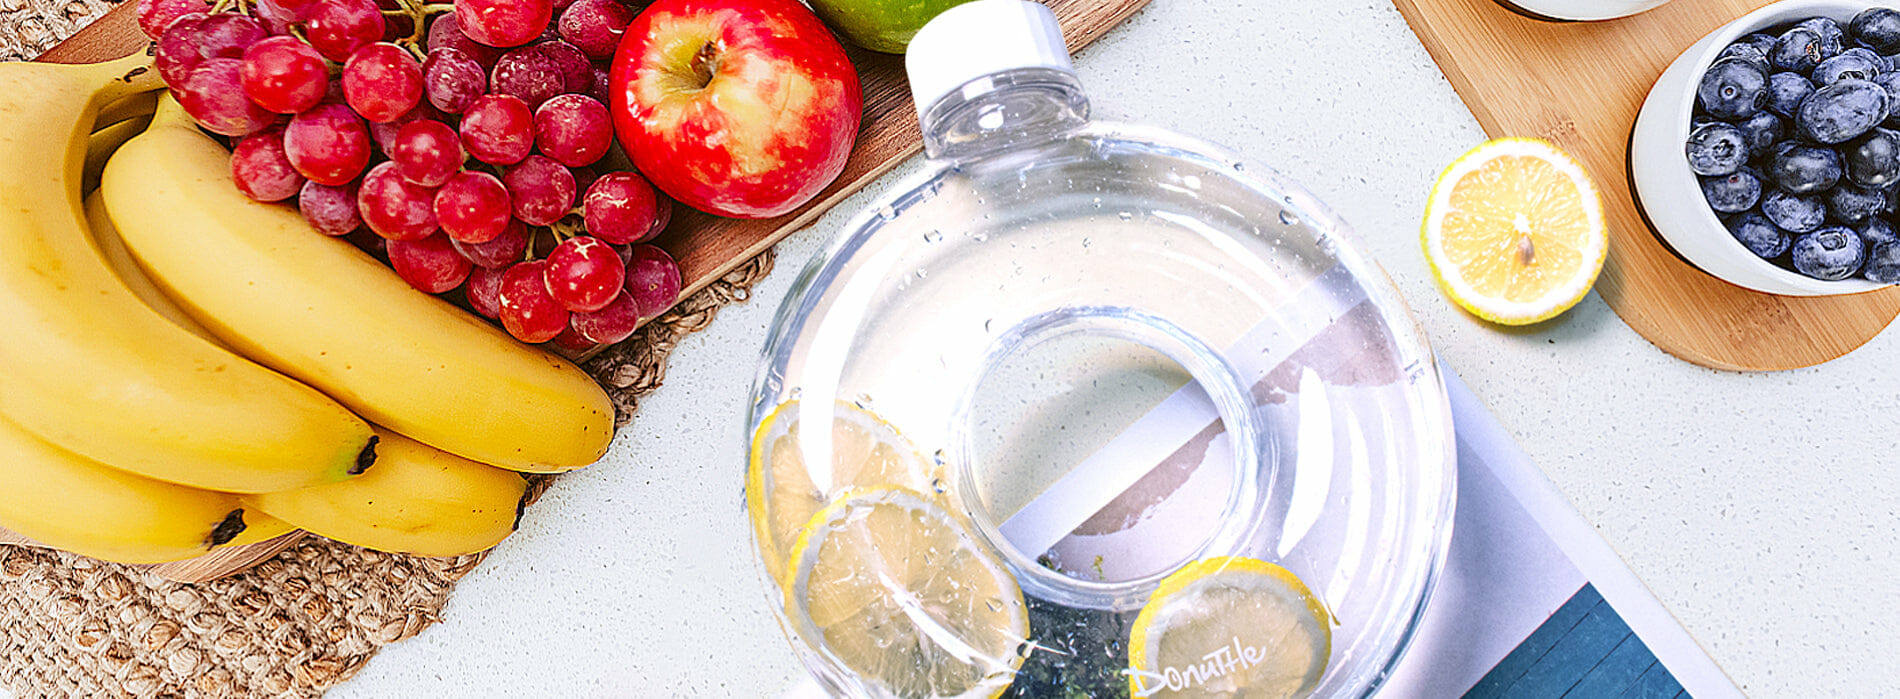 Make Your H20 Much Tastier and Even Healthier with Donuttle